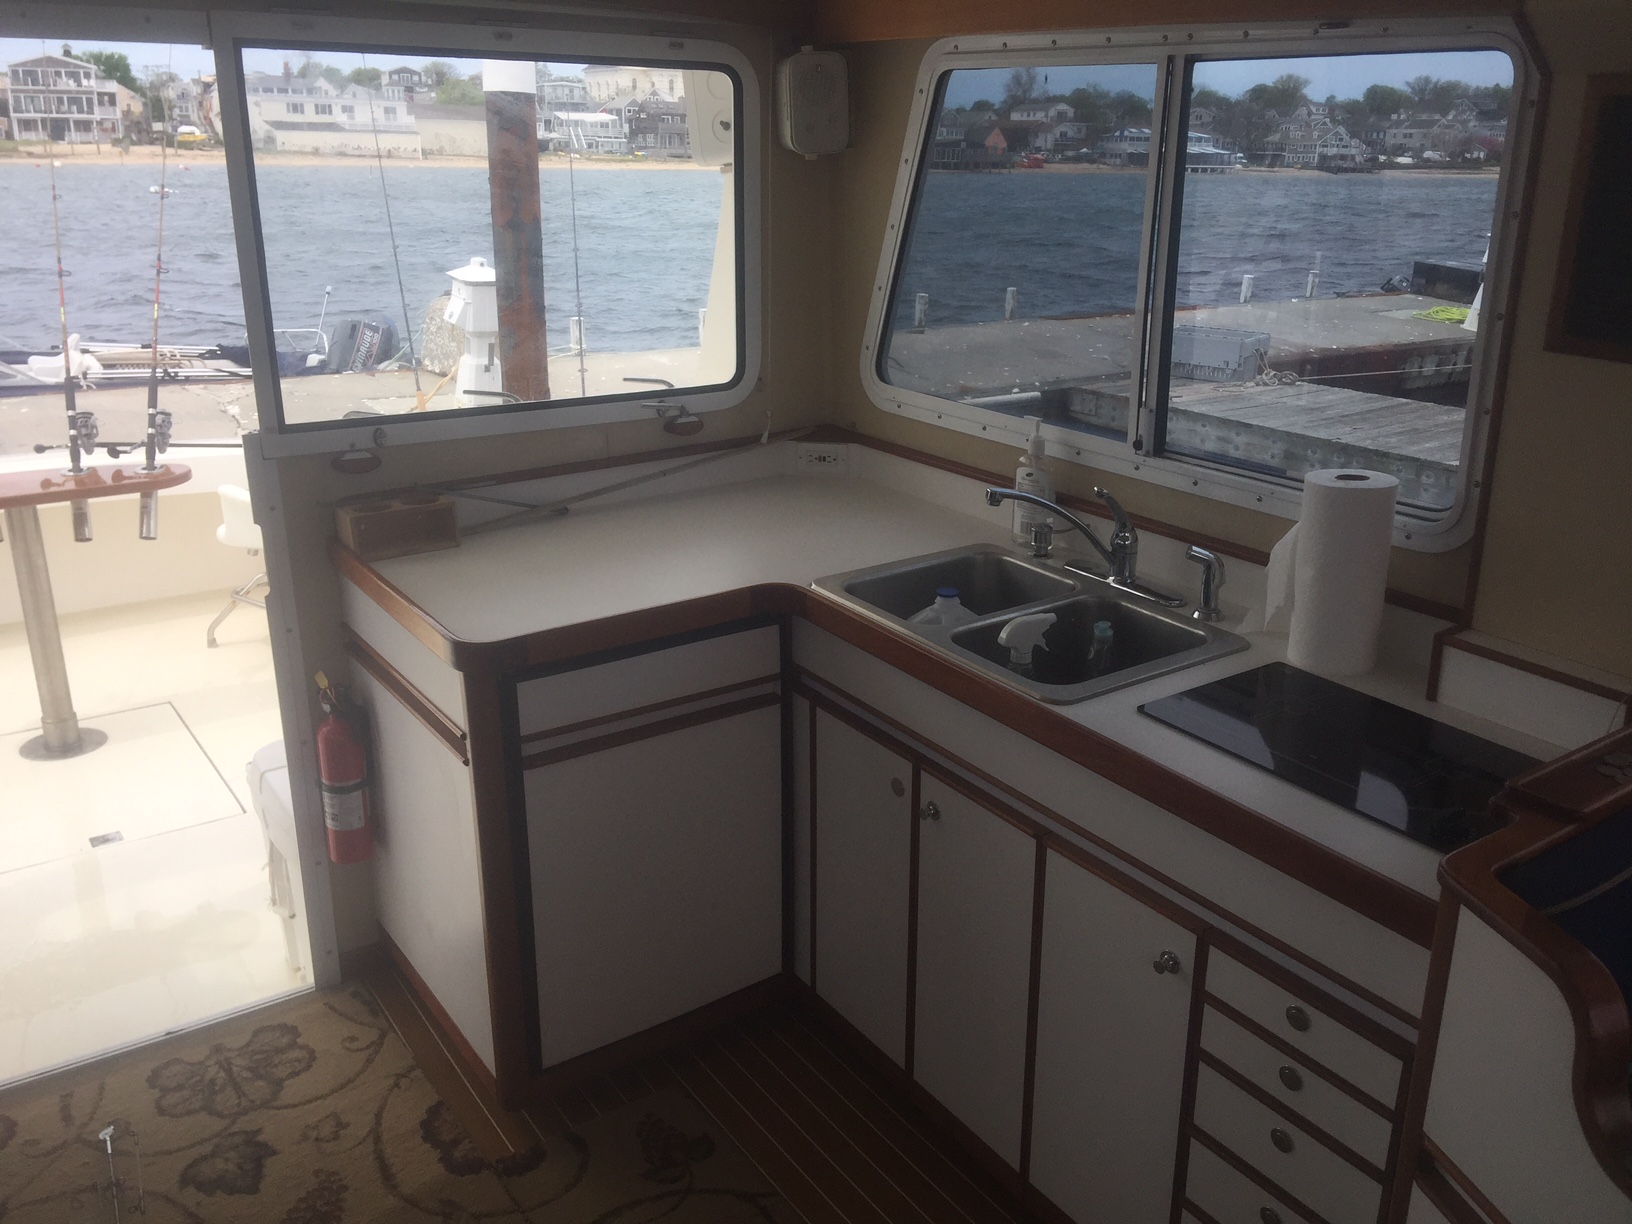 The galley inside the Beth Ann looking out towards Provincetown Harbor